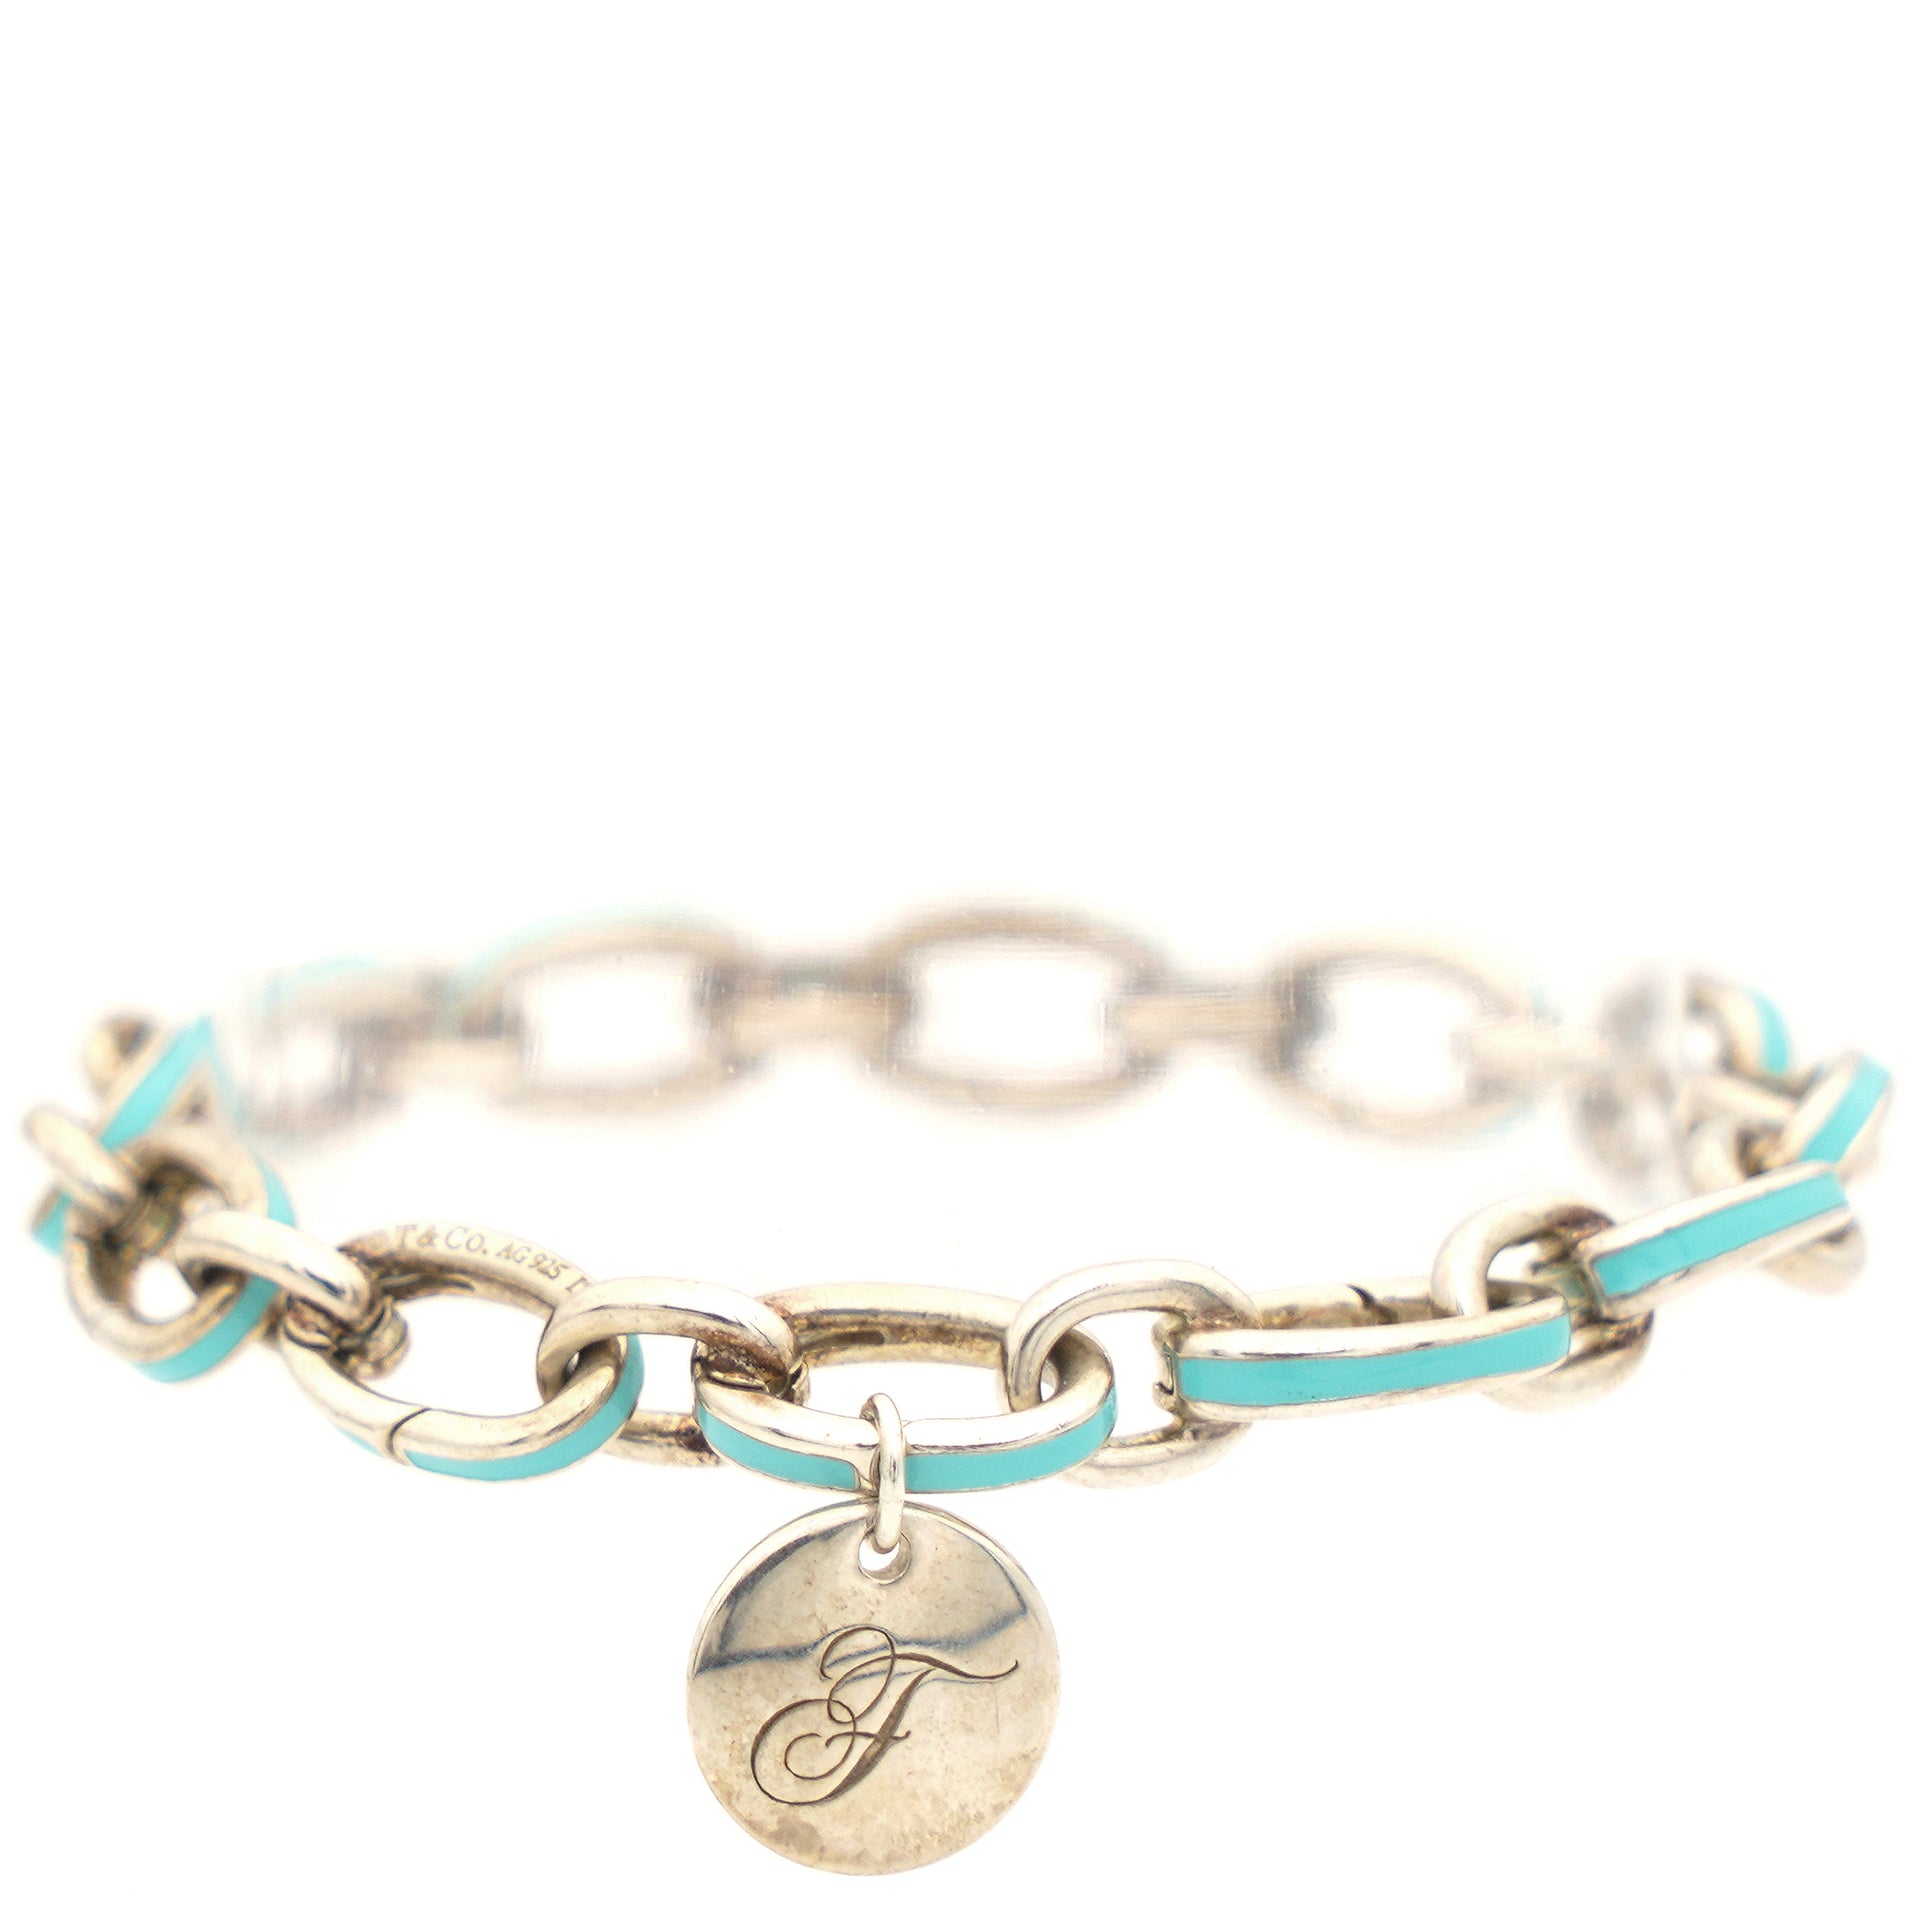 The Stone and Strand Initial Bracelet: My Daily Reminder of the Joys of  Impromptu Gifting